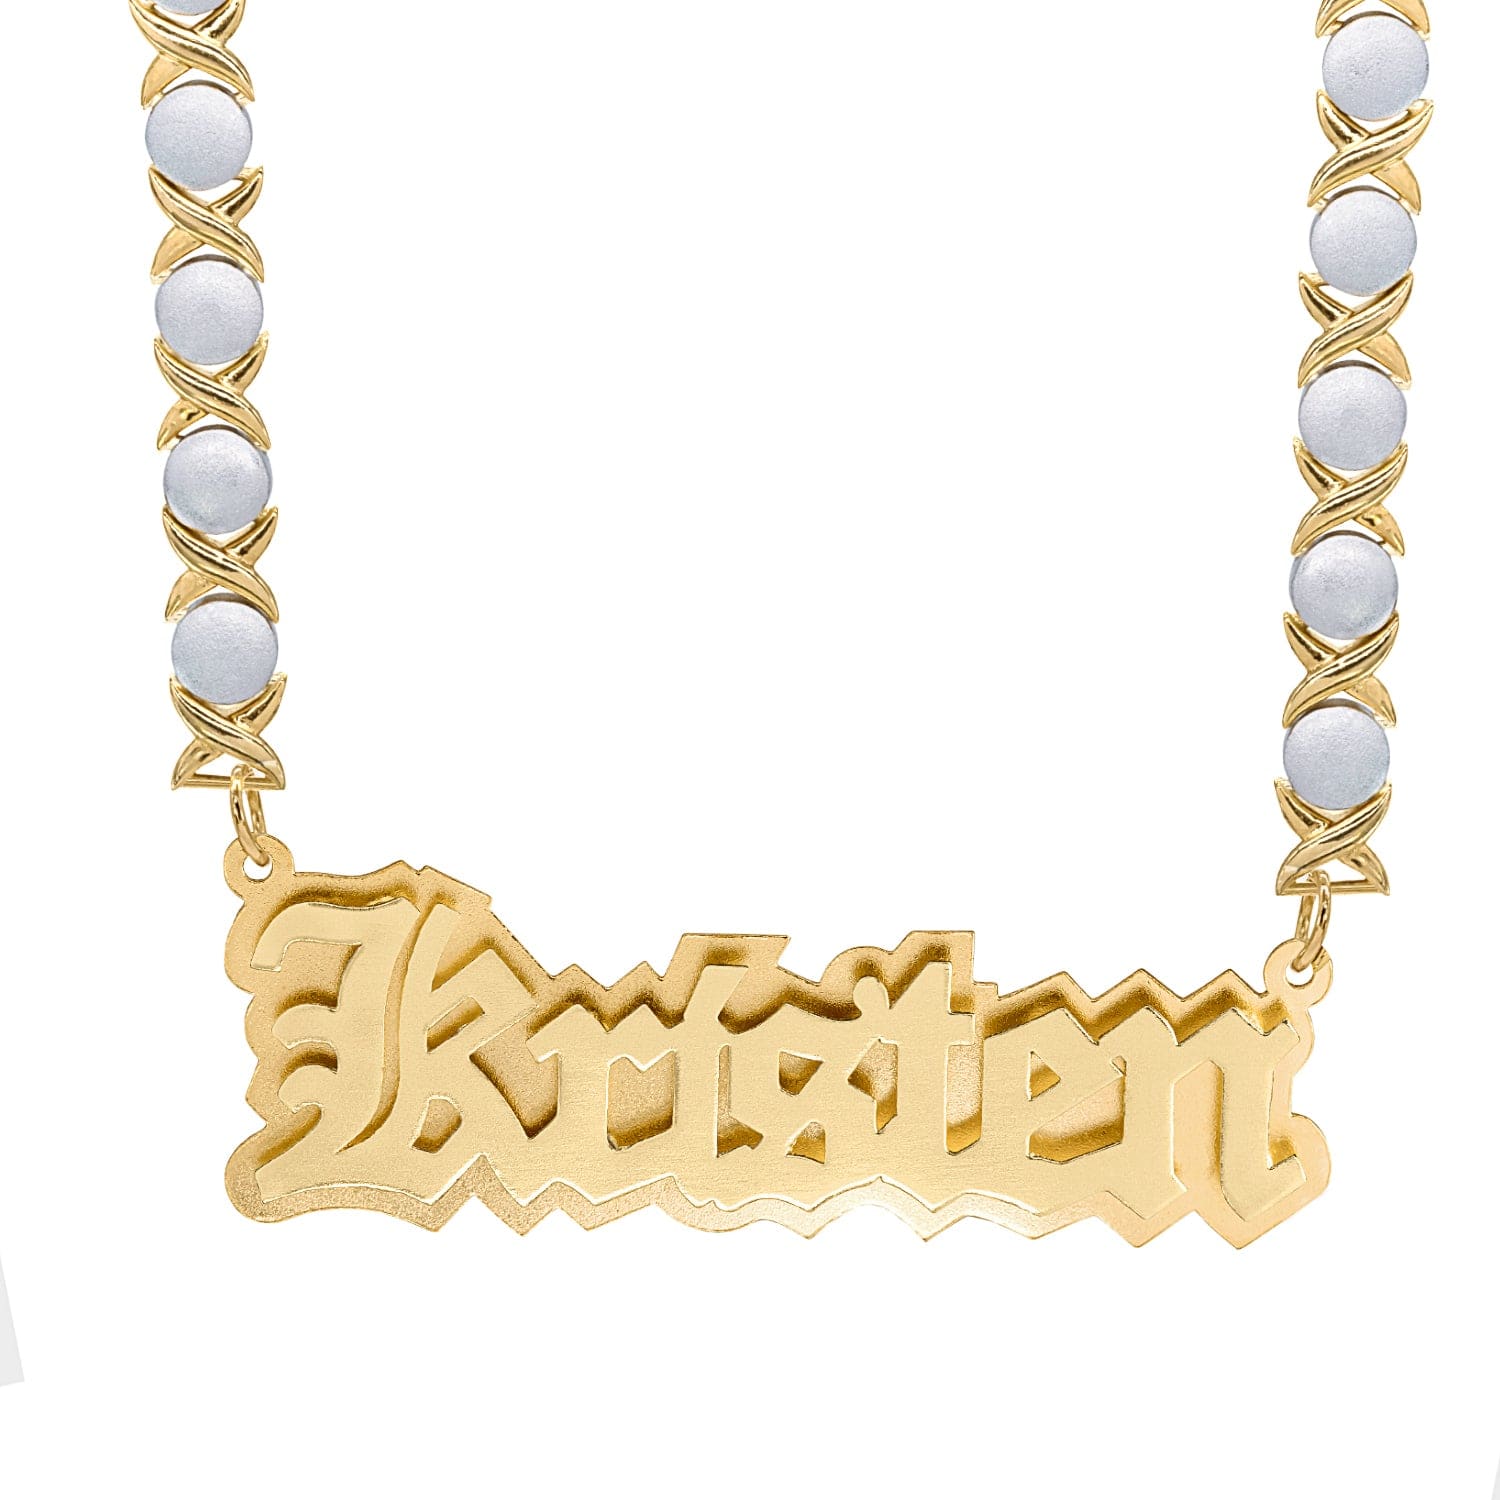 14k Gold over Sterling Silver / Rhodium Xoxo Chain Double Plated Nameplate Necklace "Kristen" With Rhodium Xoxo Chain